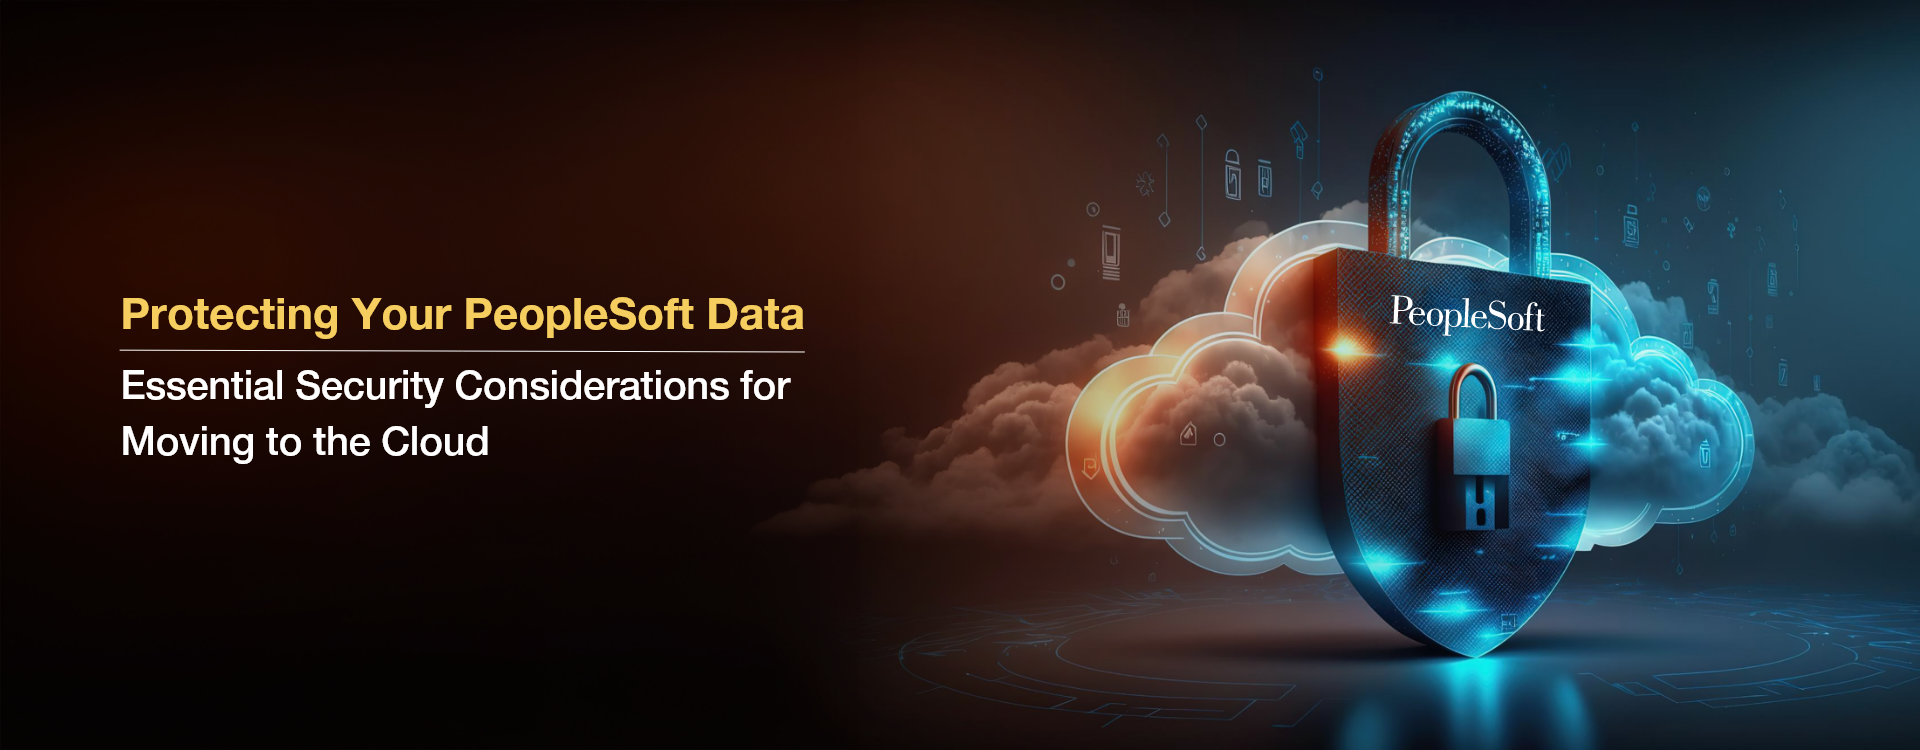 Protecting Your PeopleSoft Data: Essential Security Considerations for Moving to the Cloud